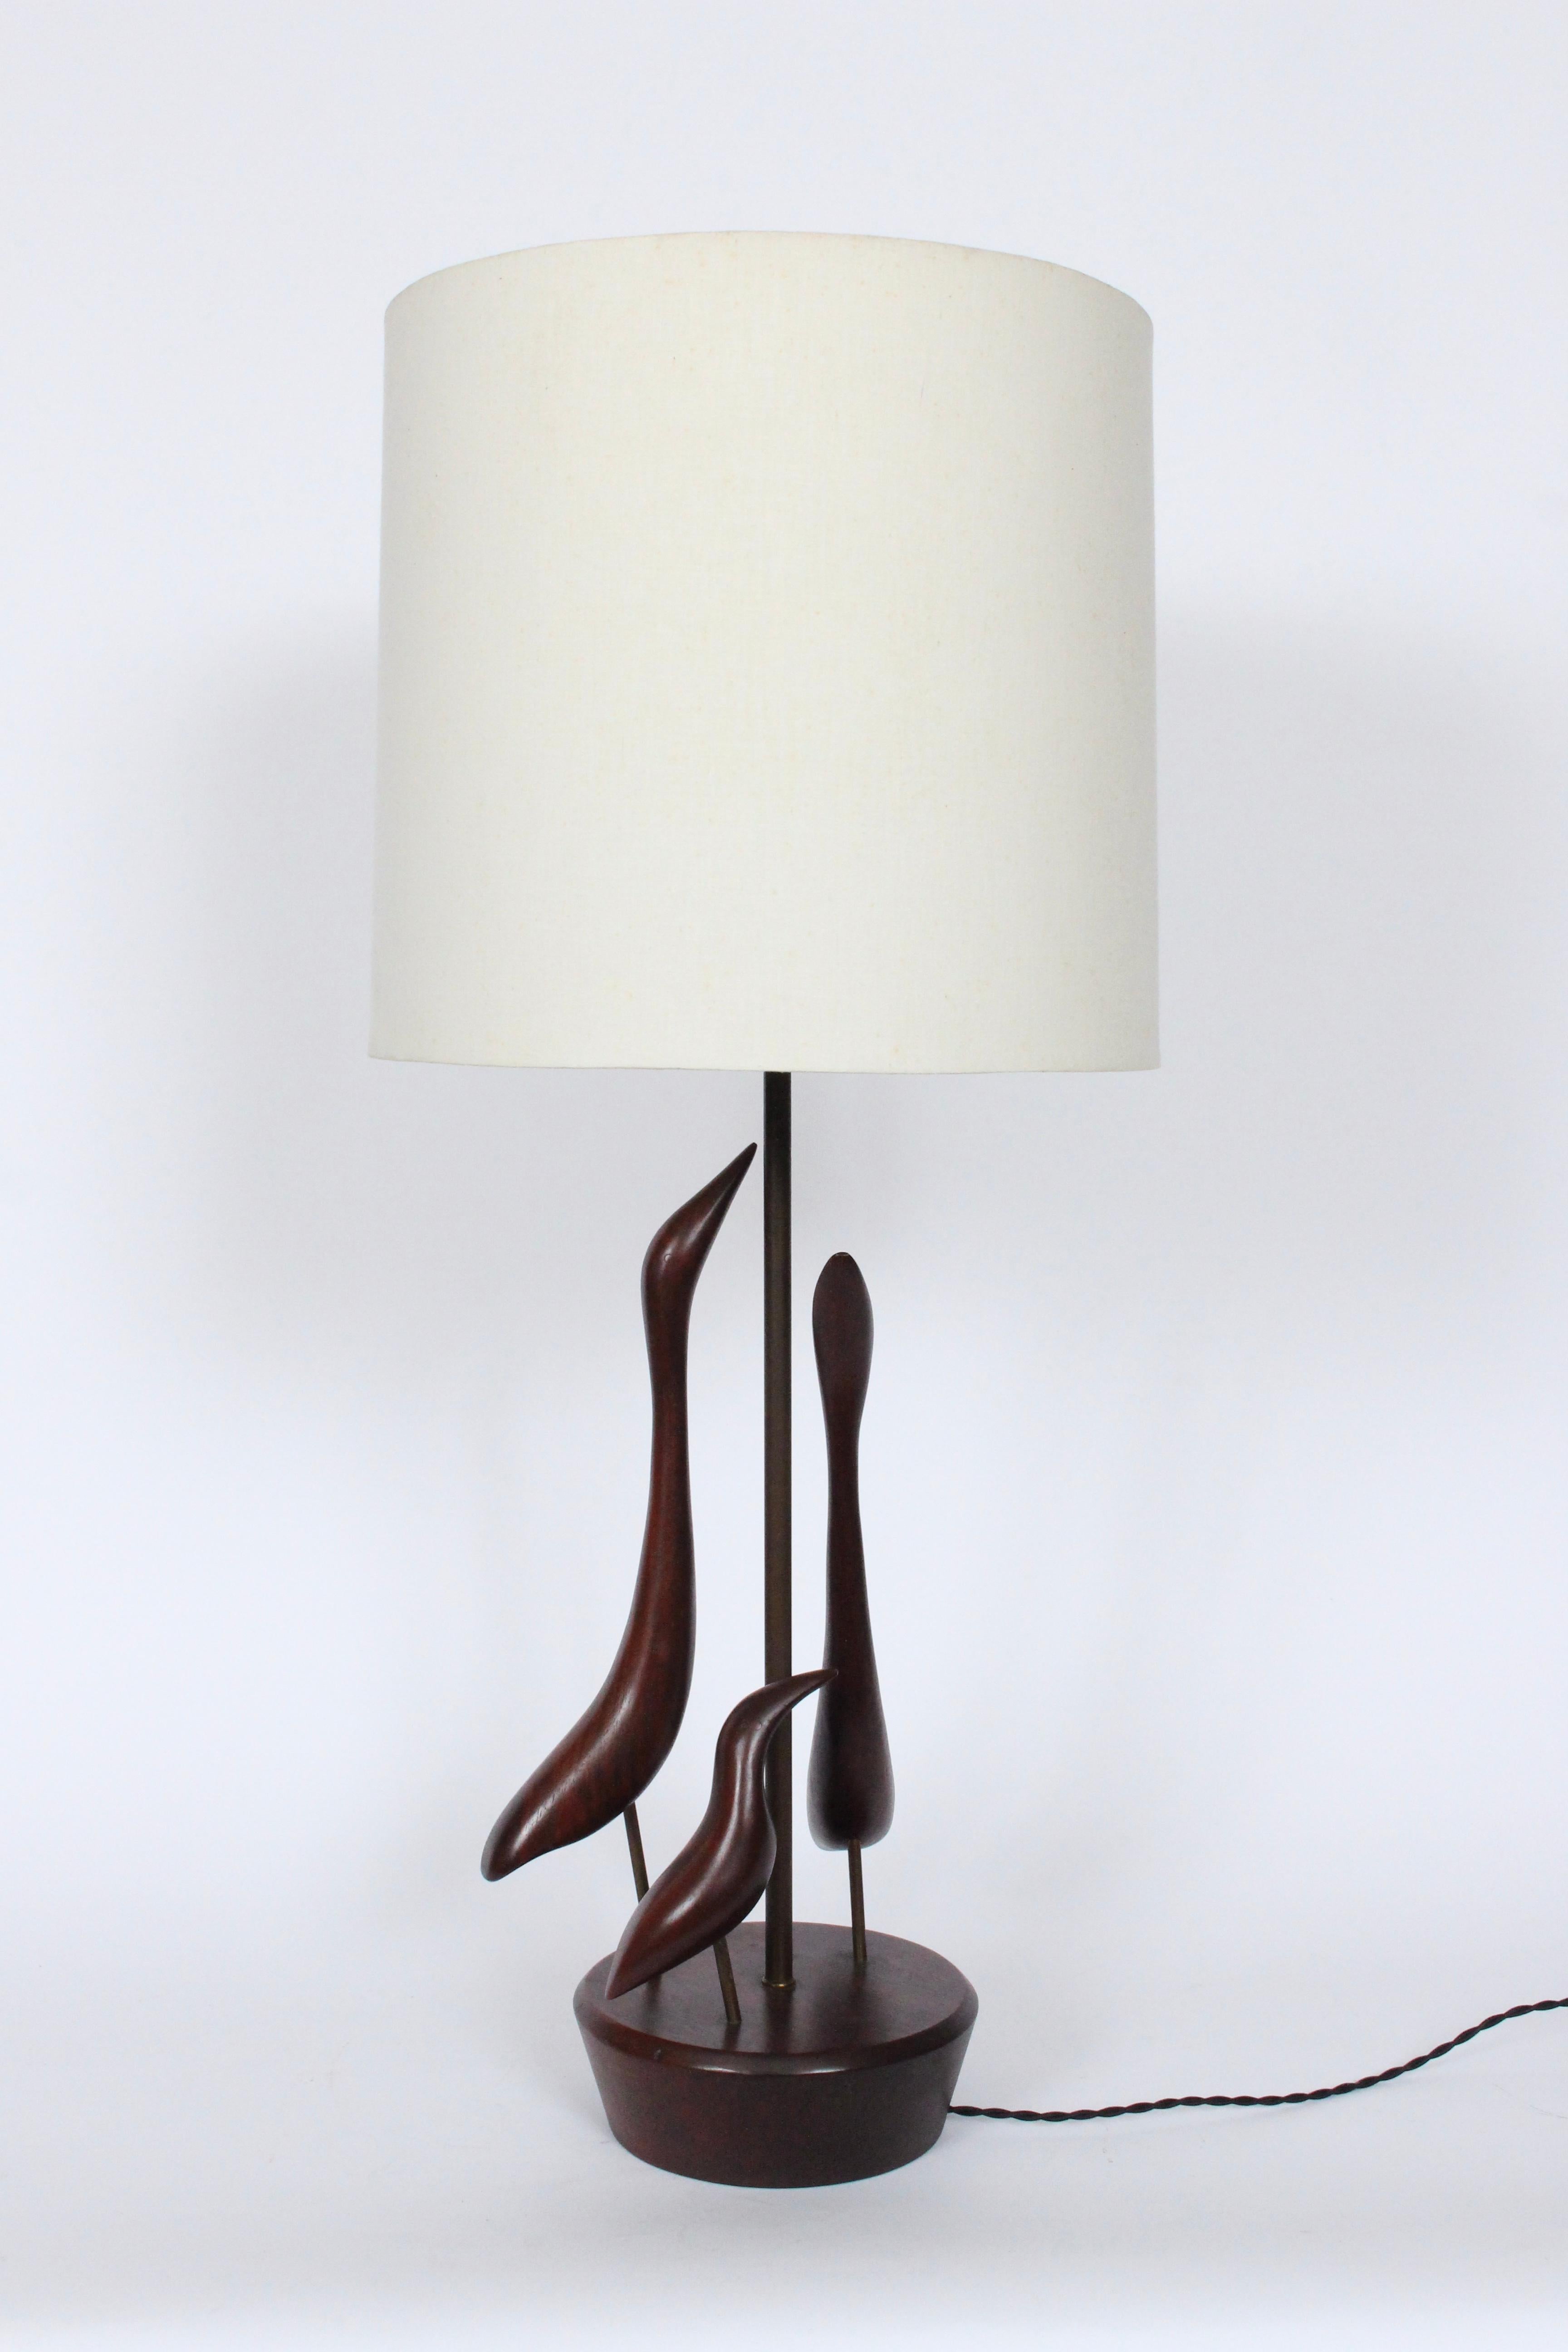 Substantial Val Robbins hand crafted abstract shore birds solid walnut table lamp. circa 1960. Featuring three hand carved dark solid walnut birds, with original finish, a top a flared round Walnut base. Small footprint. 25H to top of socket. Base